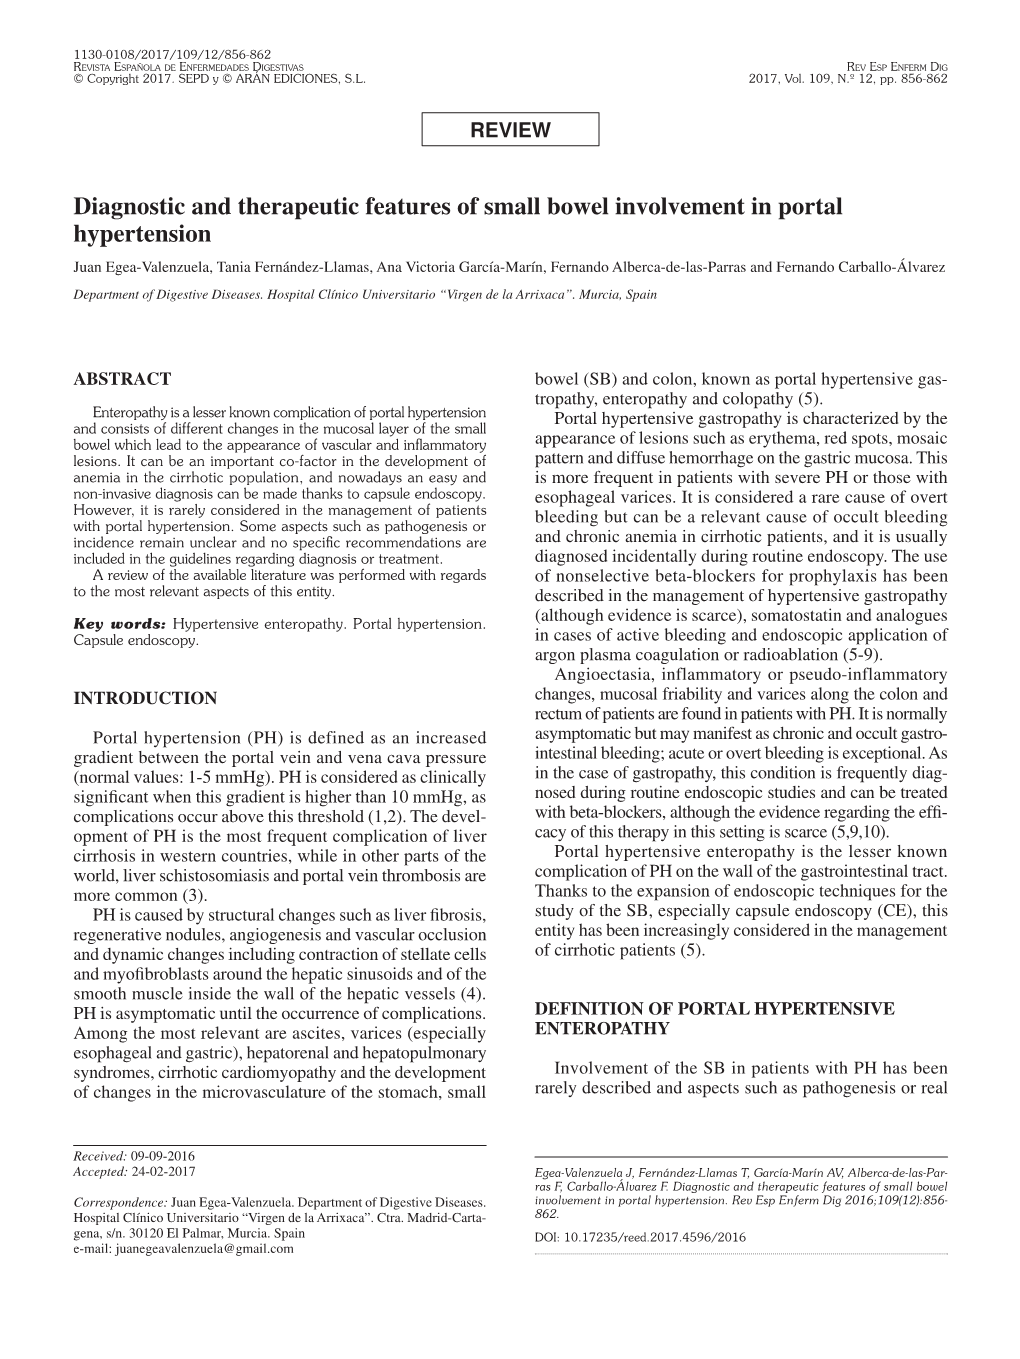 Diagnostic and Therapeutic Features of Small Bowel Involvement in Portal